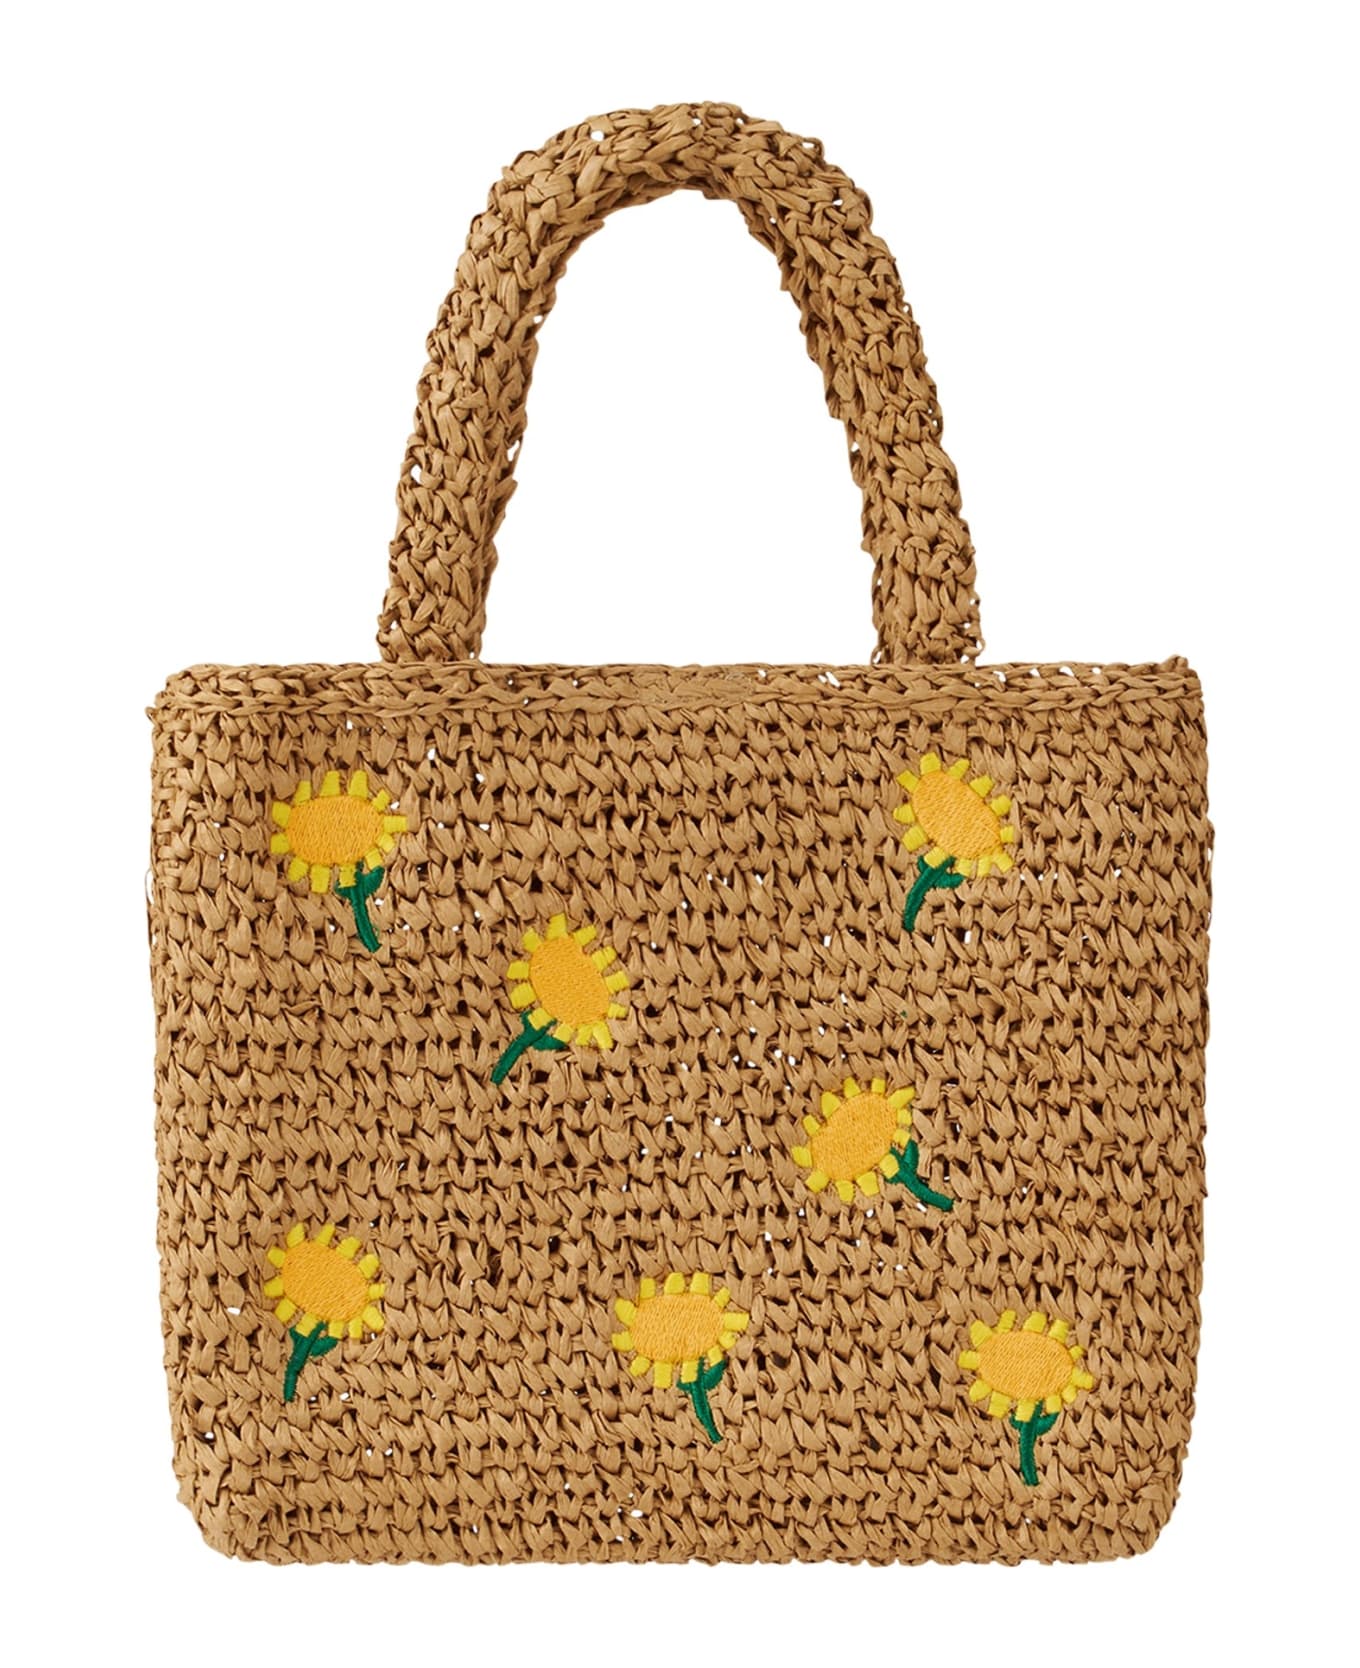 Stella McCartney Kids Tote Bag With Floral Embroidery - Brown